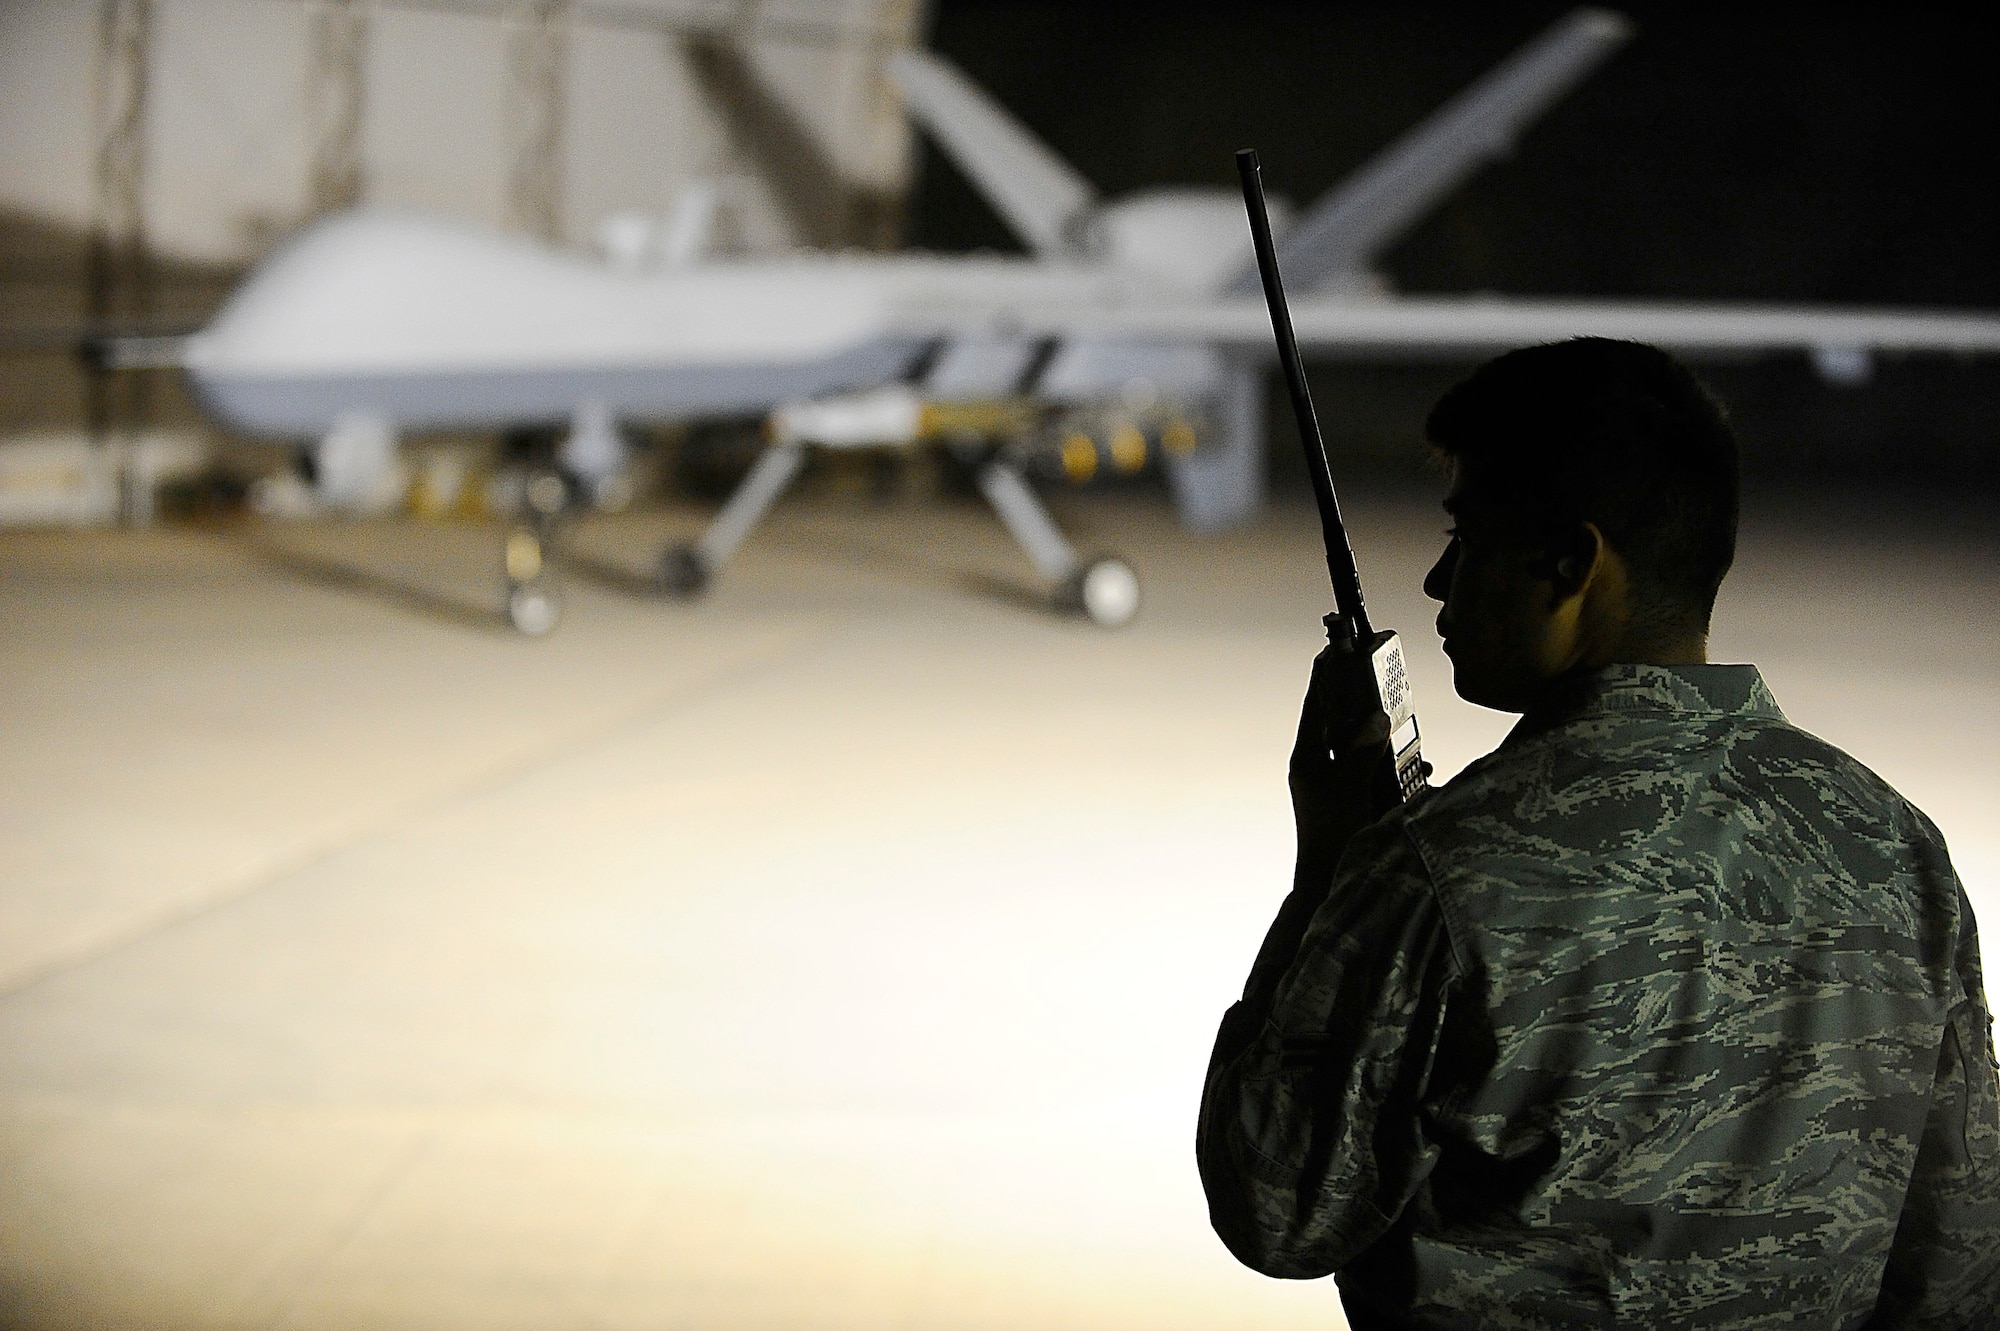 Airman 1st Class Hugo Garnica communicates with an MQ-9 Reaper pilot with a land mobile radio at Joint Base Balad, Iraq, Nov. 18. He was performing a pre-flight check to ensure the unmanned aircraft vehicle was operational. Garnica, an assistant dedicated crew chief assigned to the 332nd Expeditionary Aircraft Maintenance Squadron, is deployed from Creech Air Force Base, Nev. His hometown is Oceanside, Calif. (U.S. Air Force photo/Airman 1st Class Jason Epley)